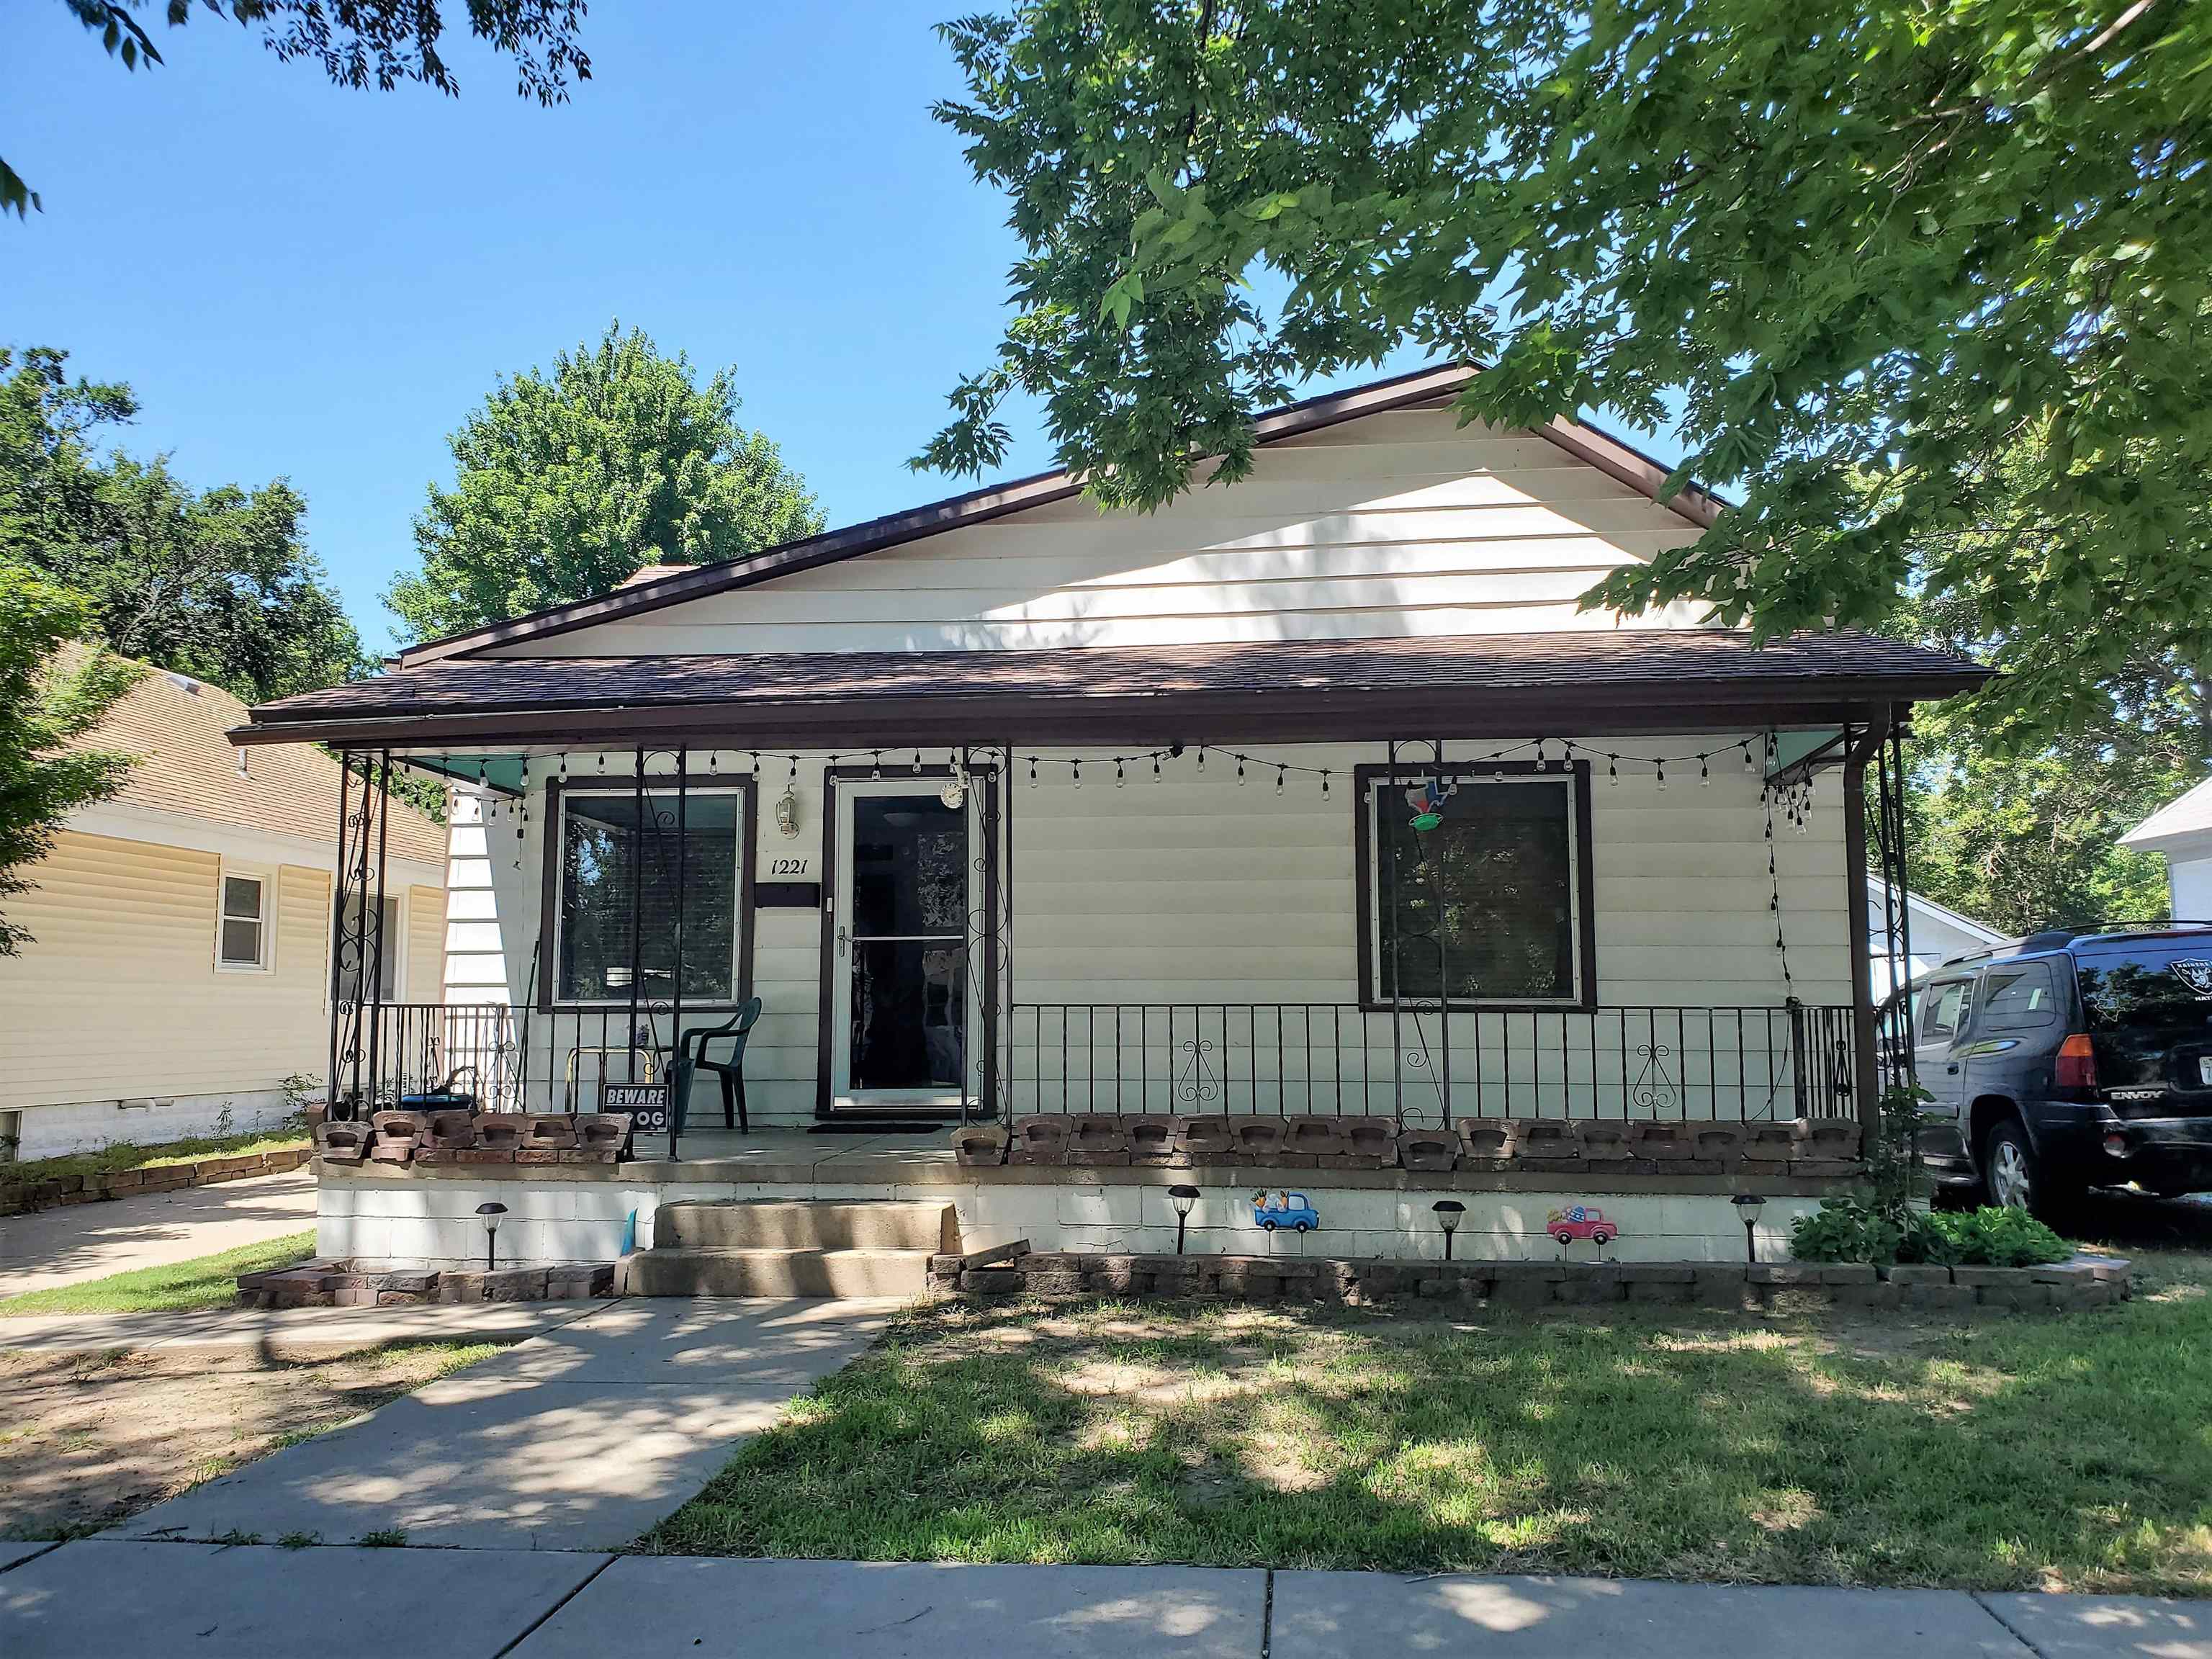 Come see this gem in the heart of Wichita! Just minutes from downtown, Kellogg and I-135, this 3 bed